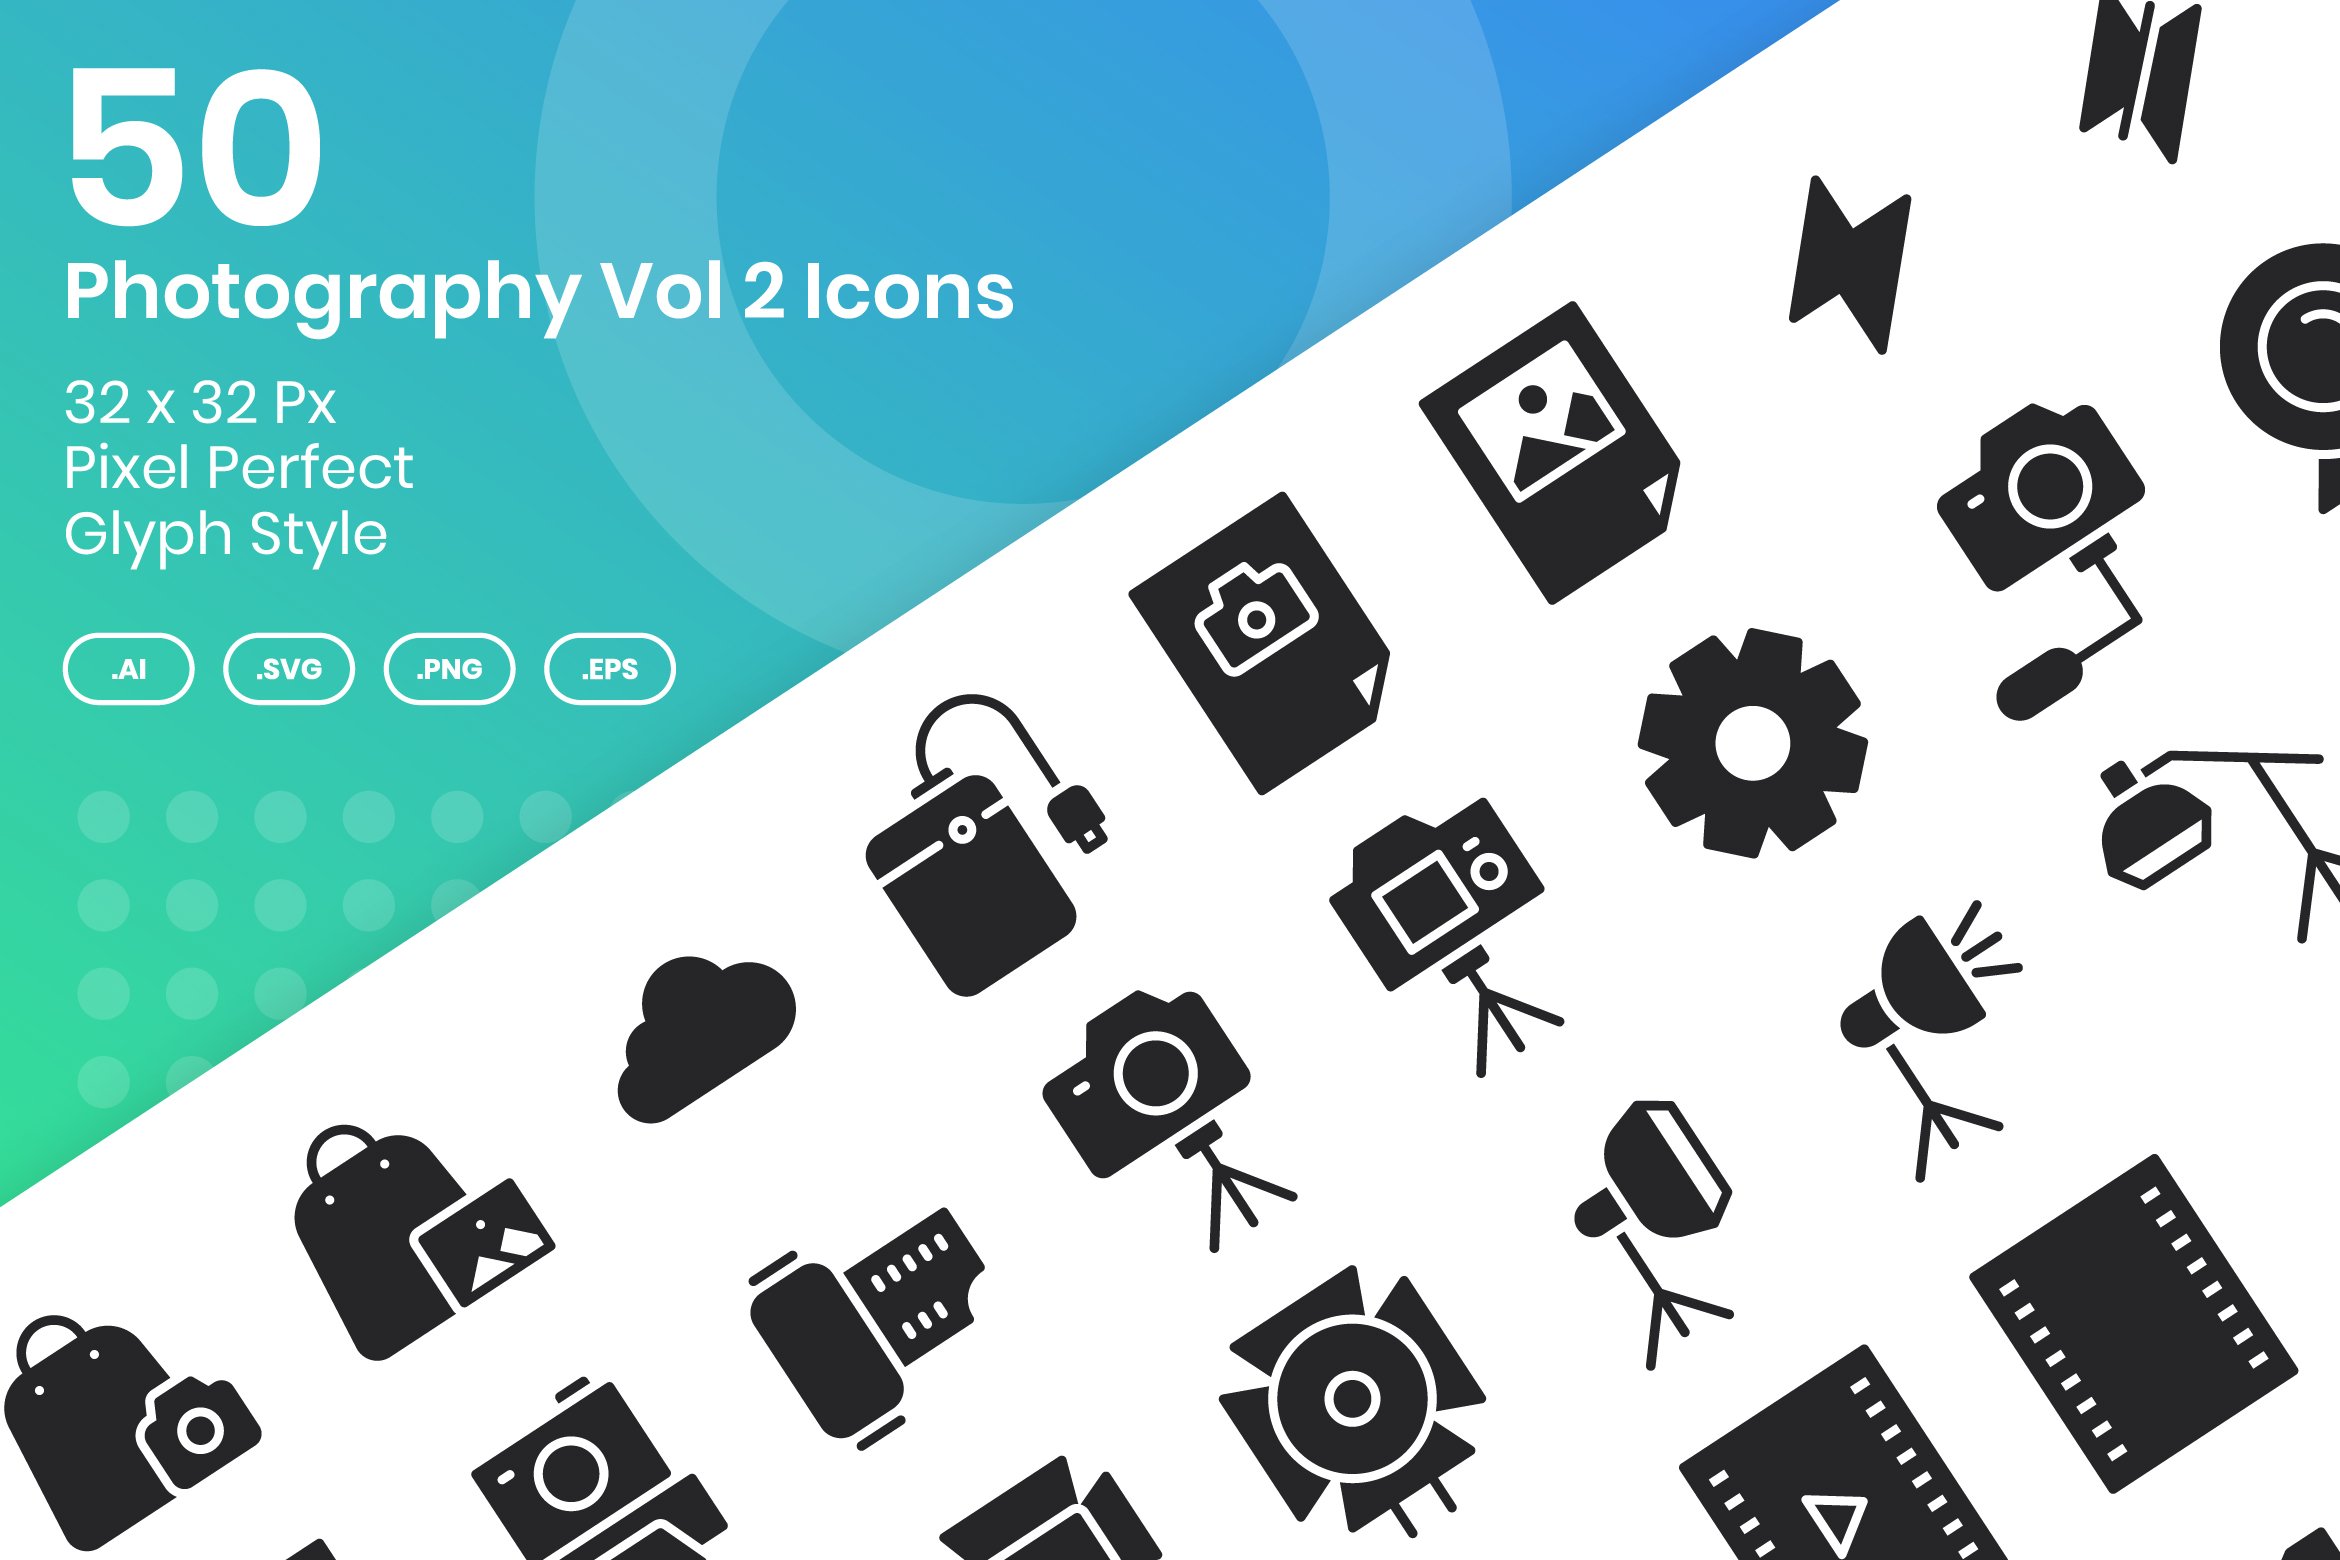 50 Photography Vol 2 - Glyph cover image.